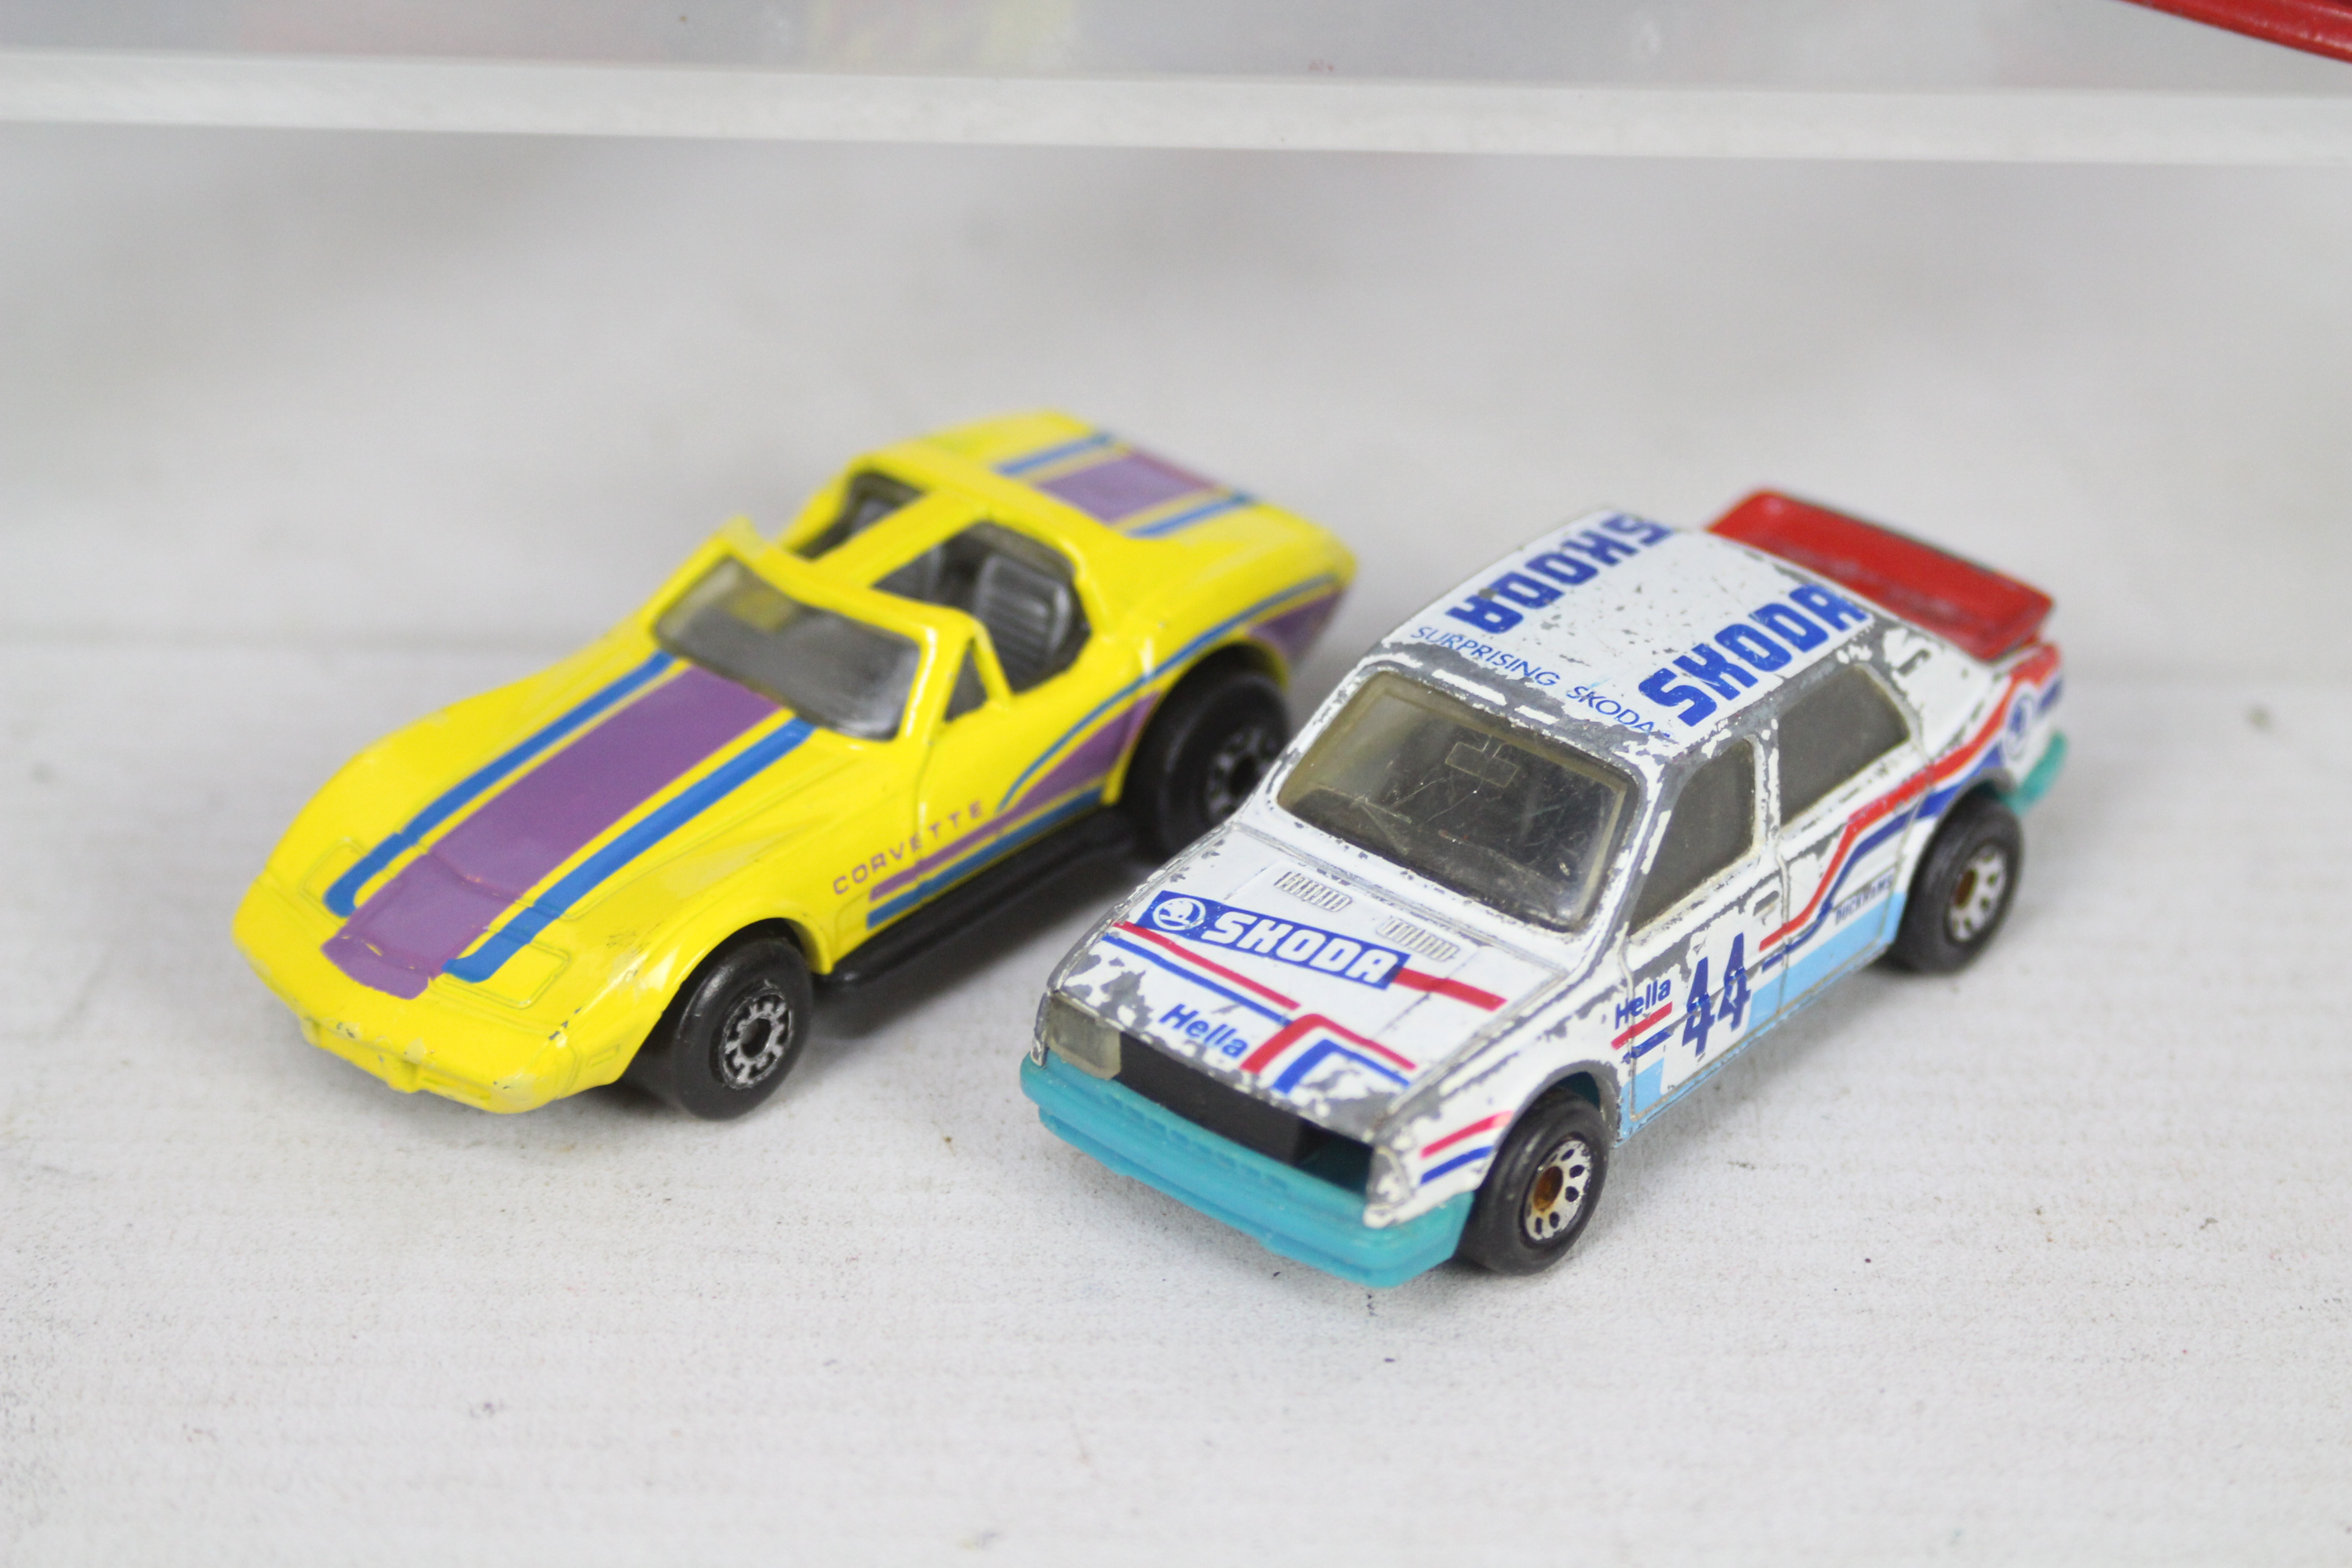 Matchbox - 12 x unboxed race and rally models including 2 x Skoda 130 LR Estelles, - Image 6 of 6